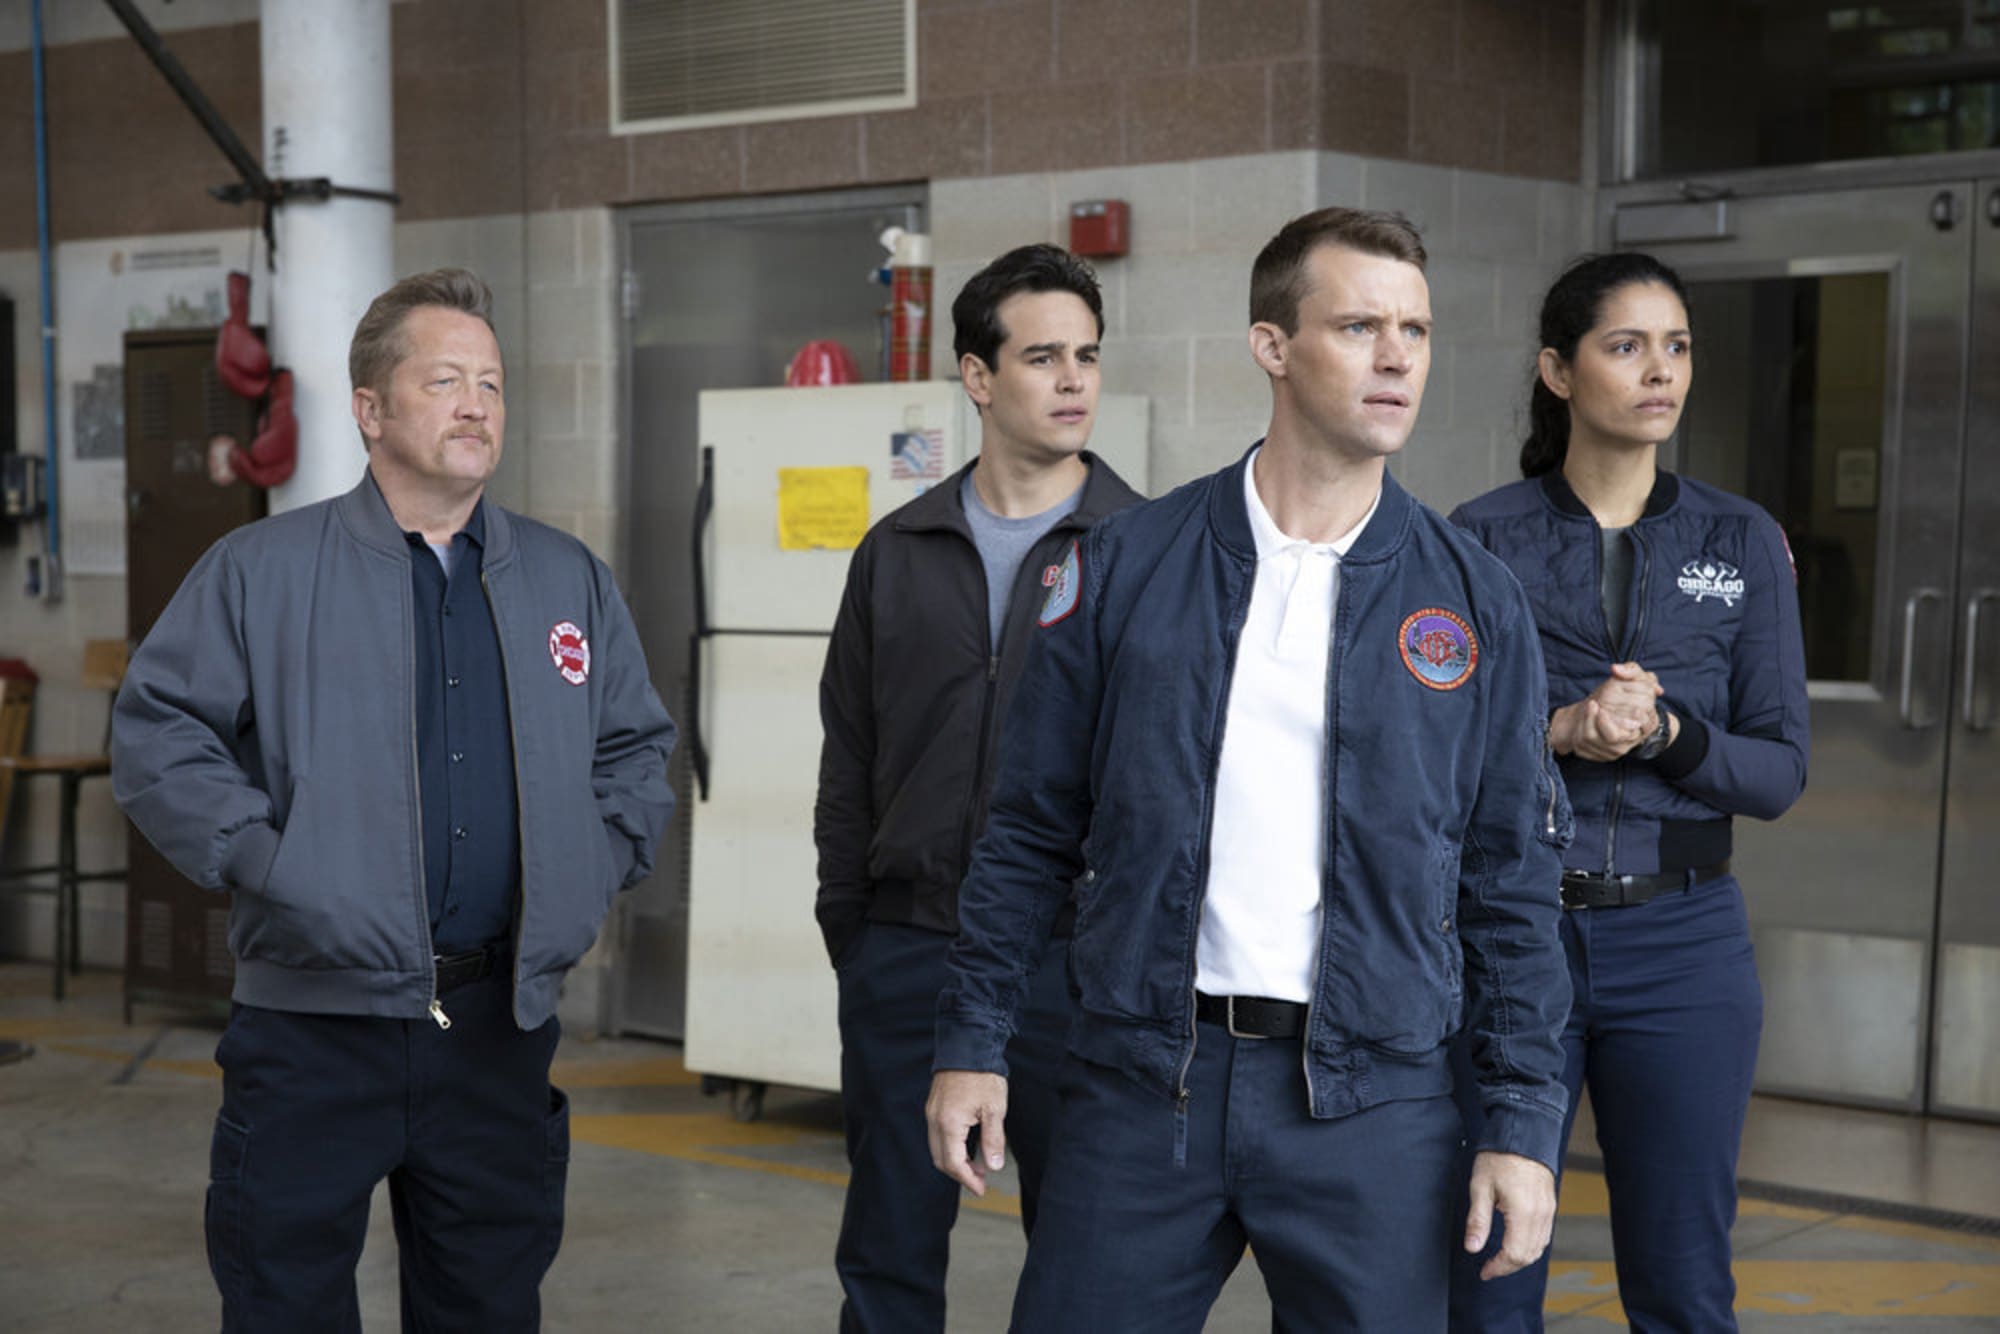 rerun of chicago fire halloween 2020 episode Chicago Fire Is A New Episode Of Season 8 On Tonight Apr 1 rerun of chicago fire halloween 2020 episode